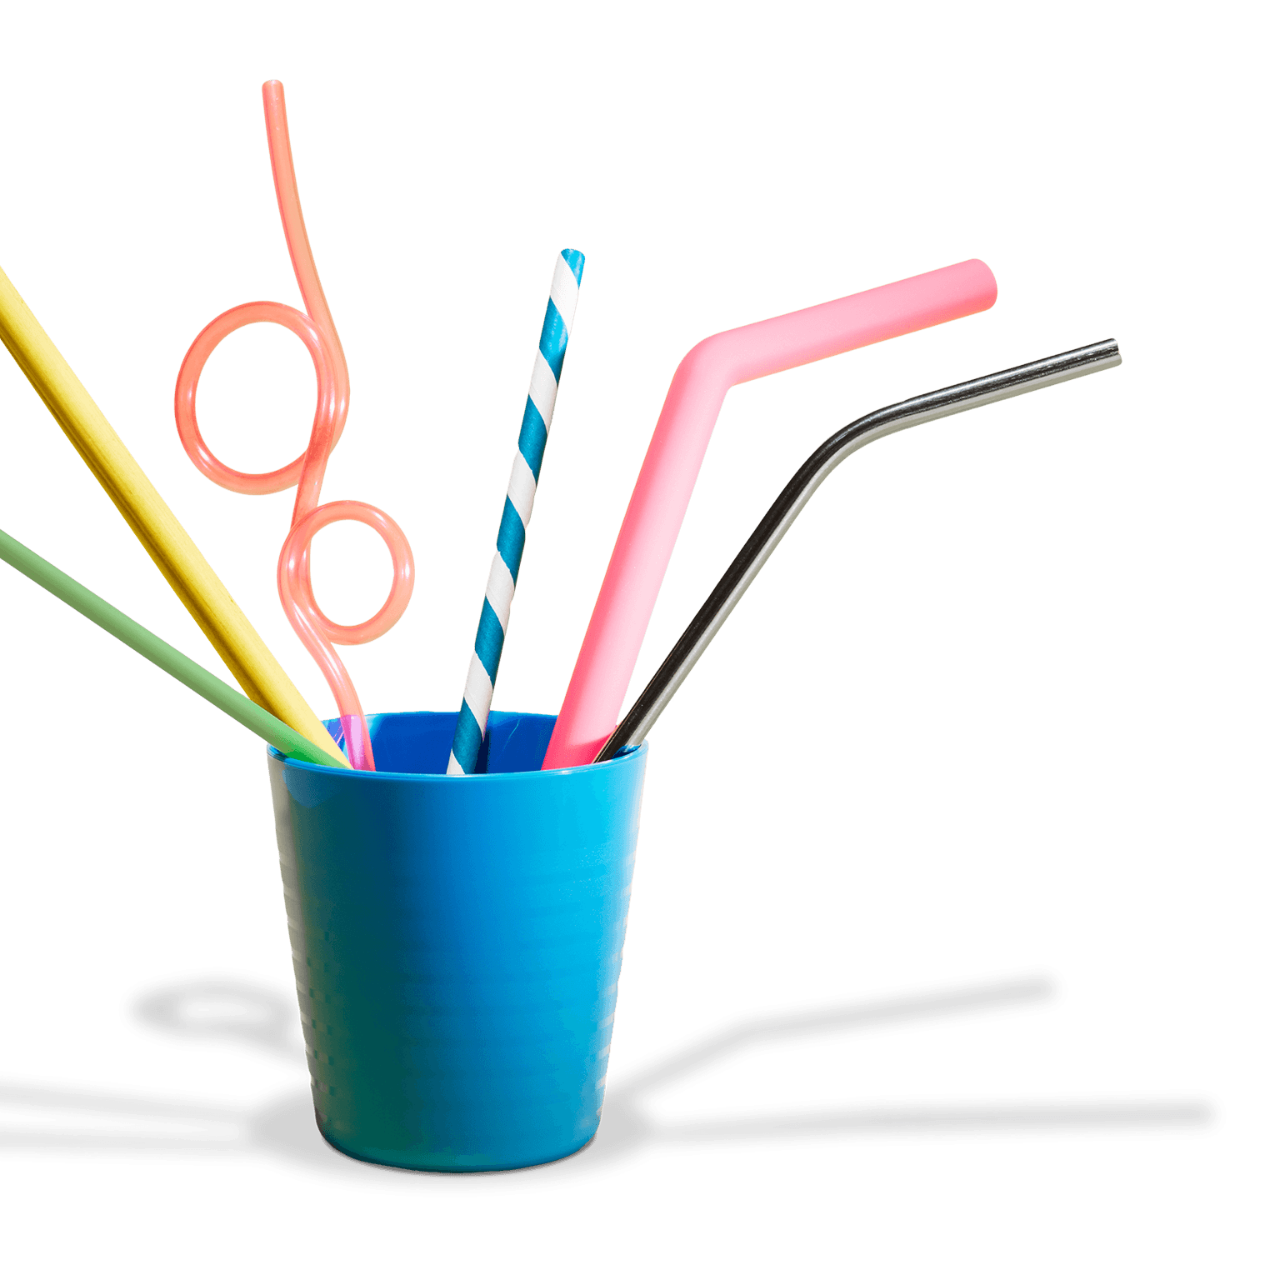 Six different drinking straws in a cup